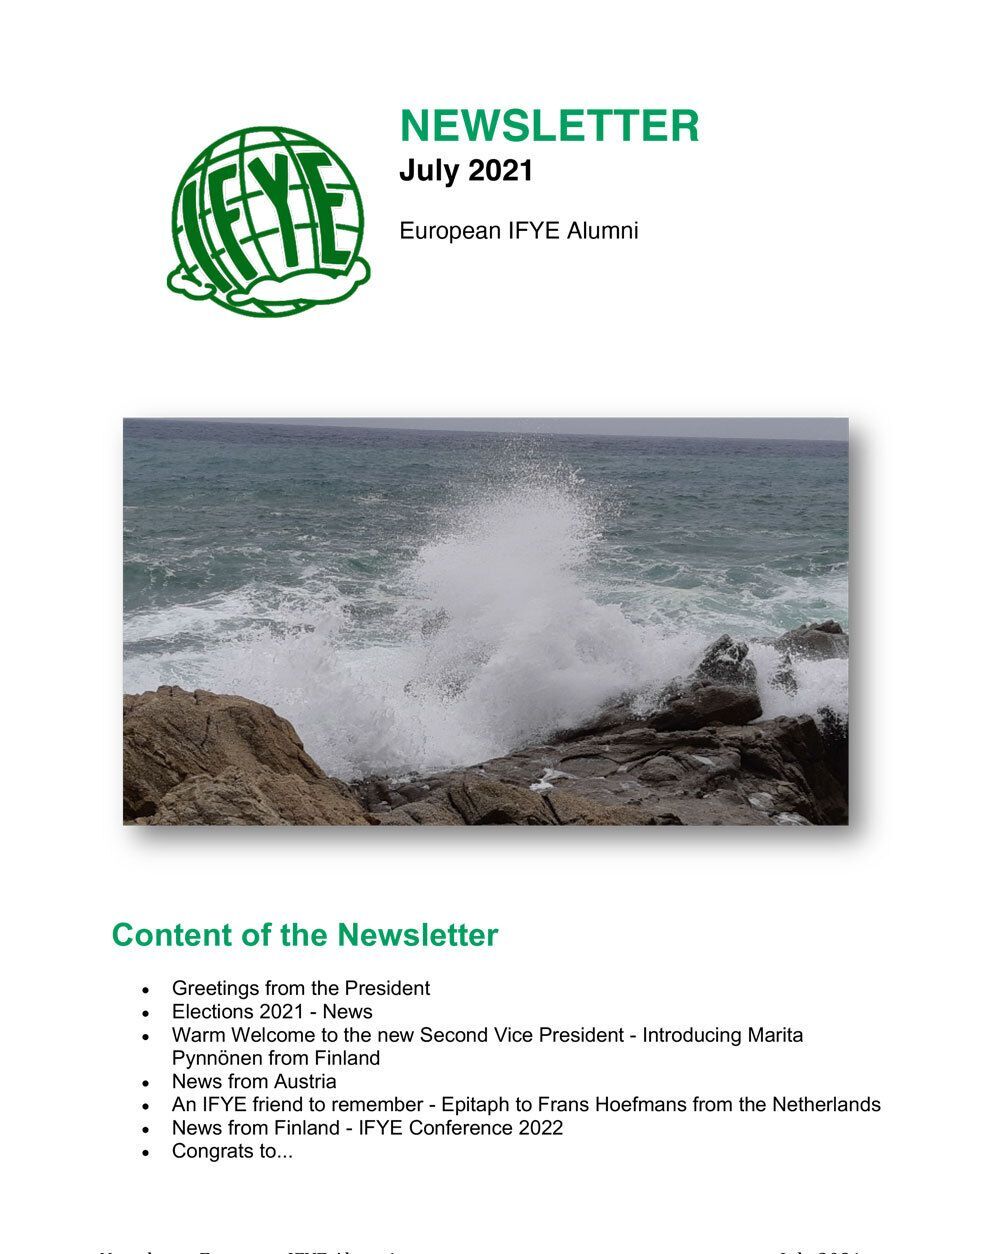 Read the Global July 2021 Newsletter